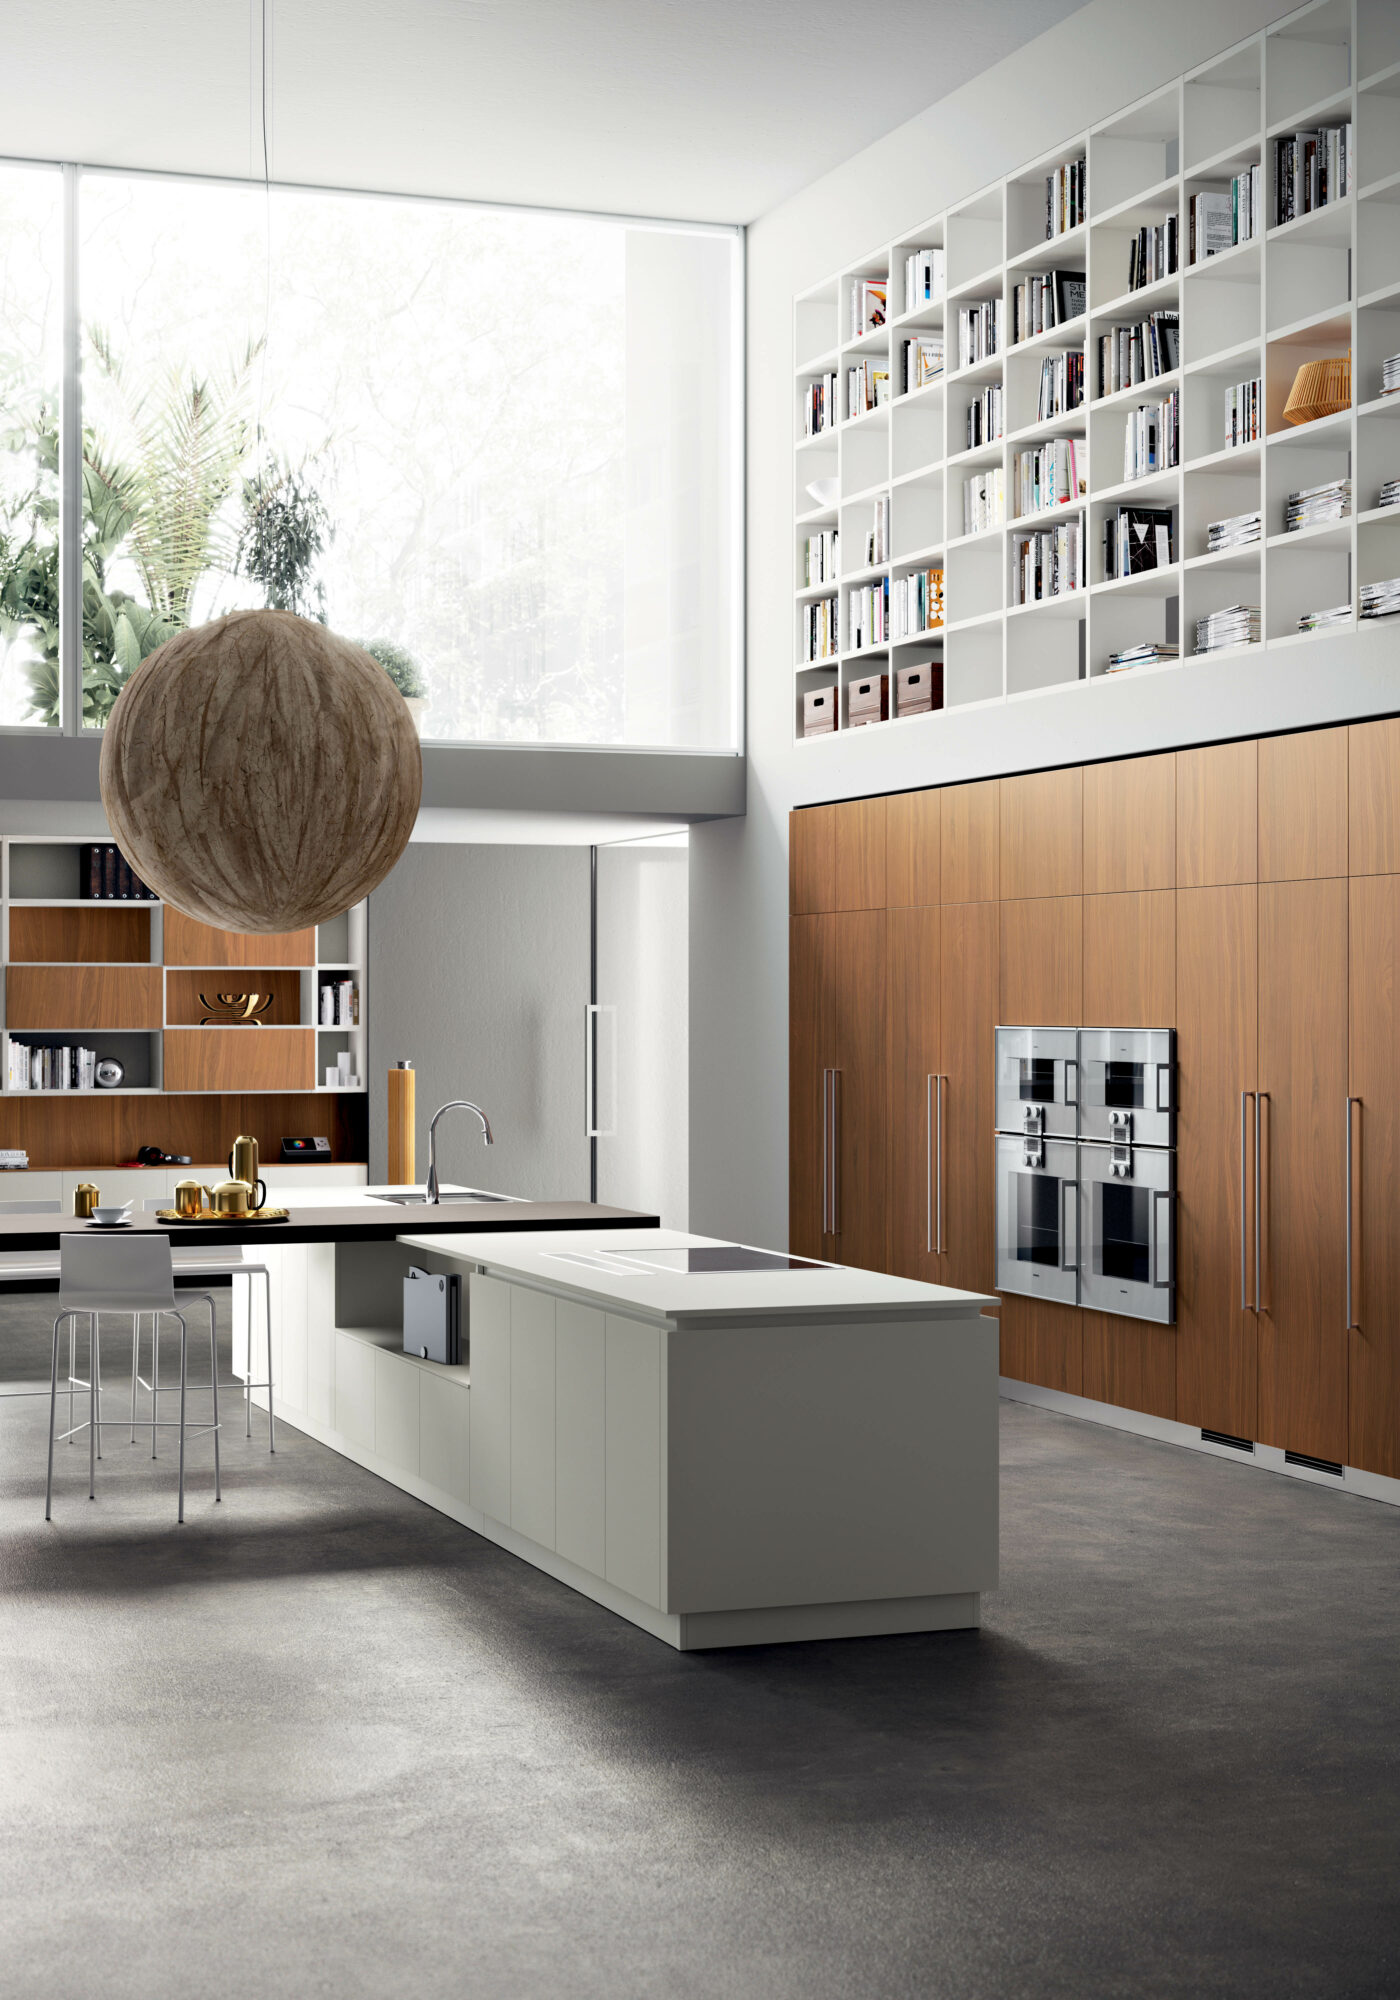 Scavolini showroom featuring a white kitchen island and wood cabinetry mentioned by Nicholas Moriarty